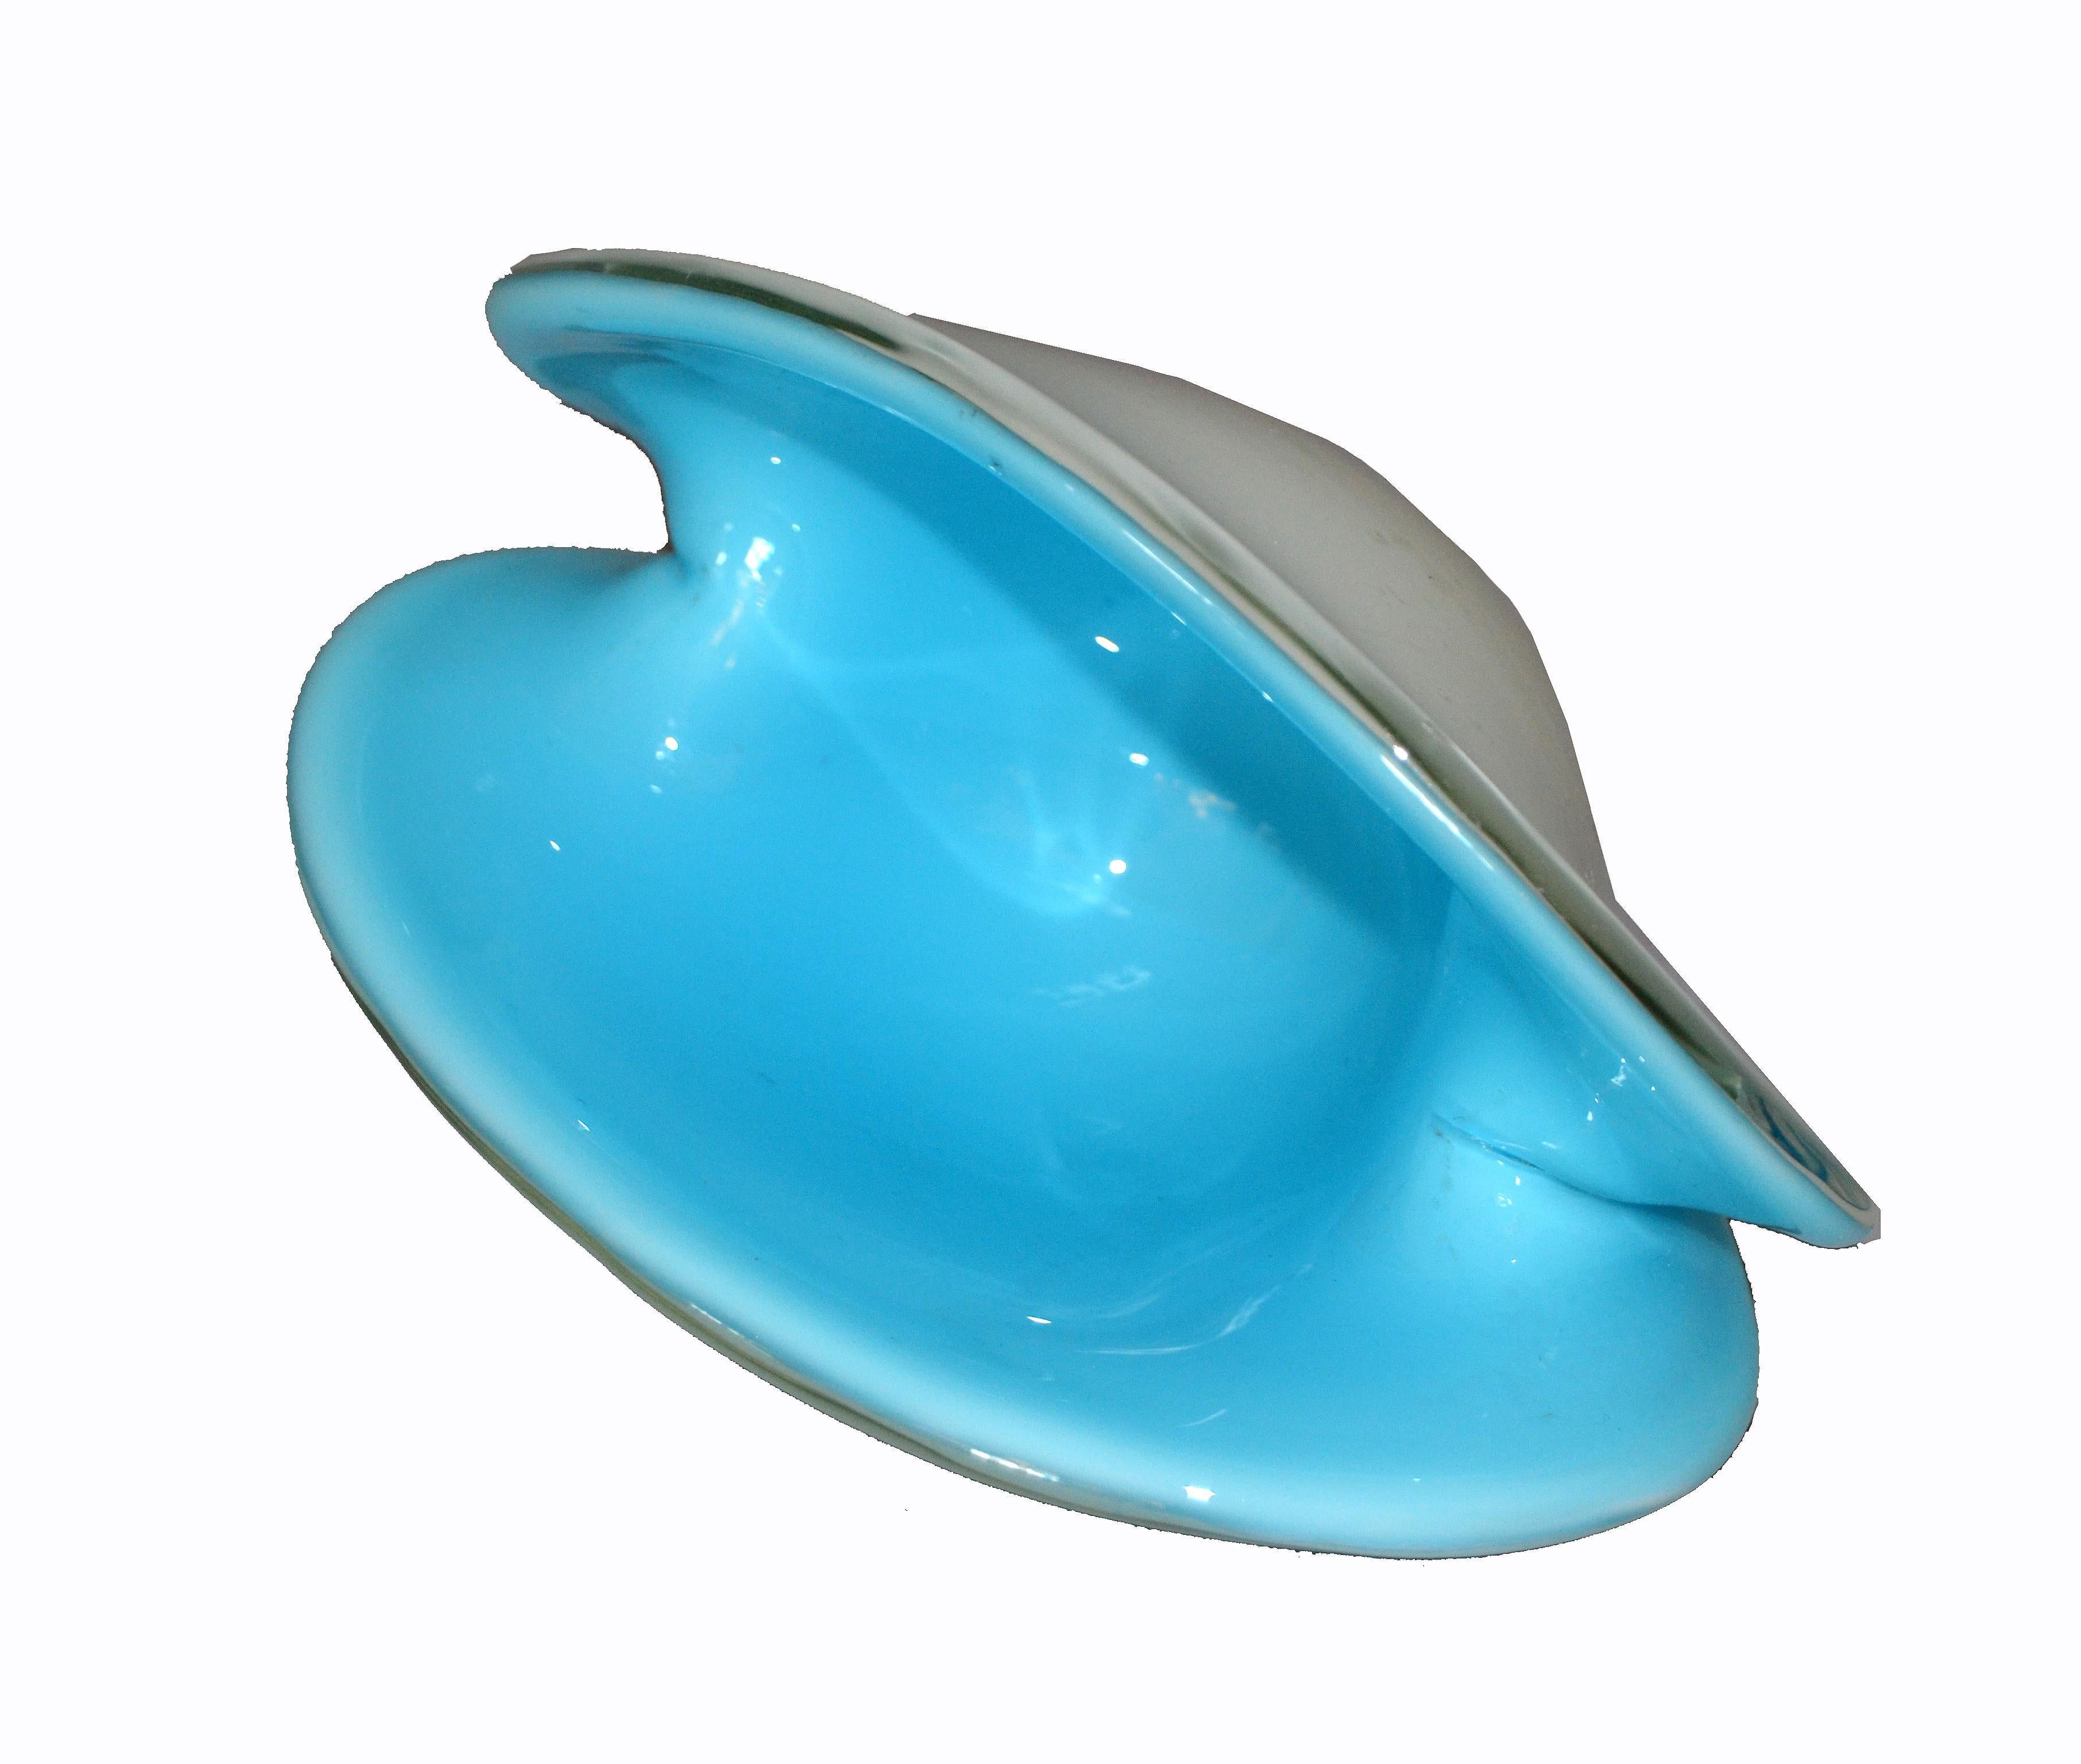 Italian Murano glass two-color triangular shaped catchall bowl. Turquoise blue interior that takes on an organic look, white outer casing.
Simply beautiful.